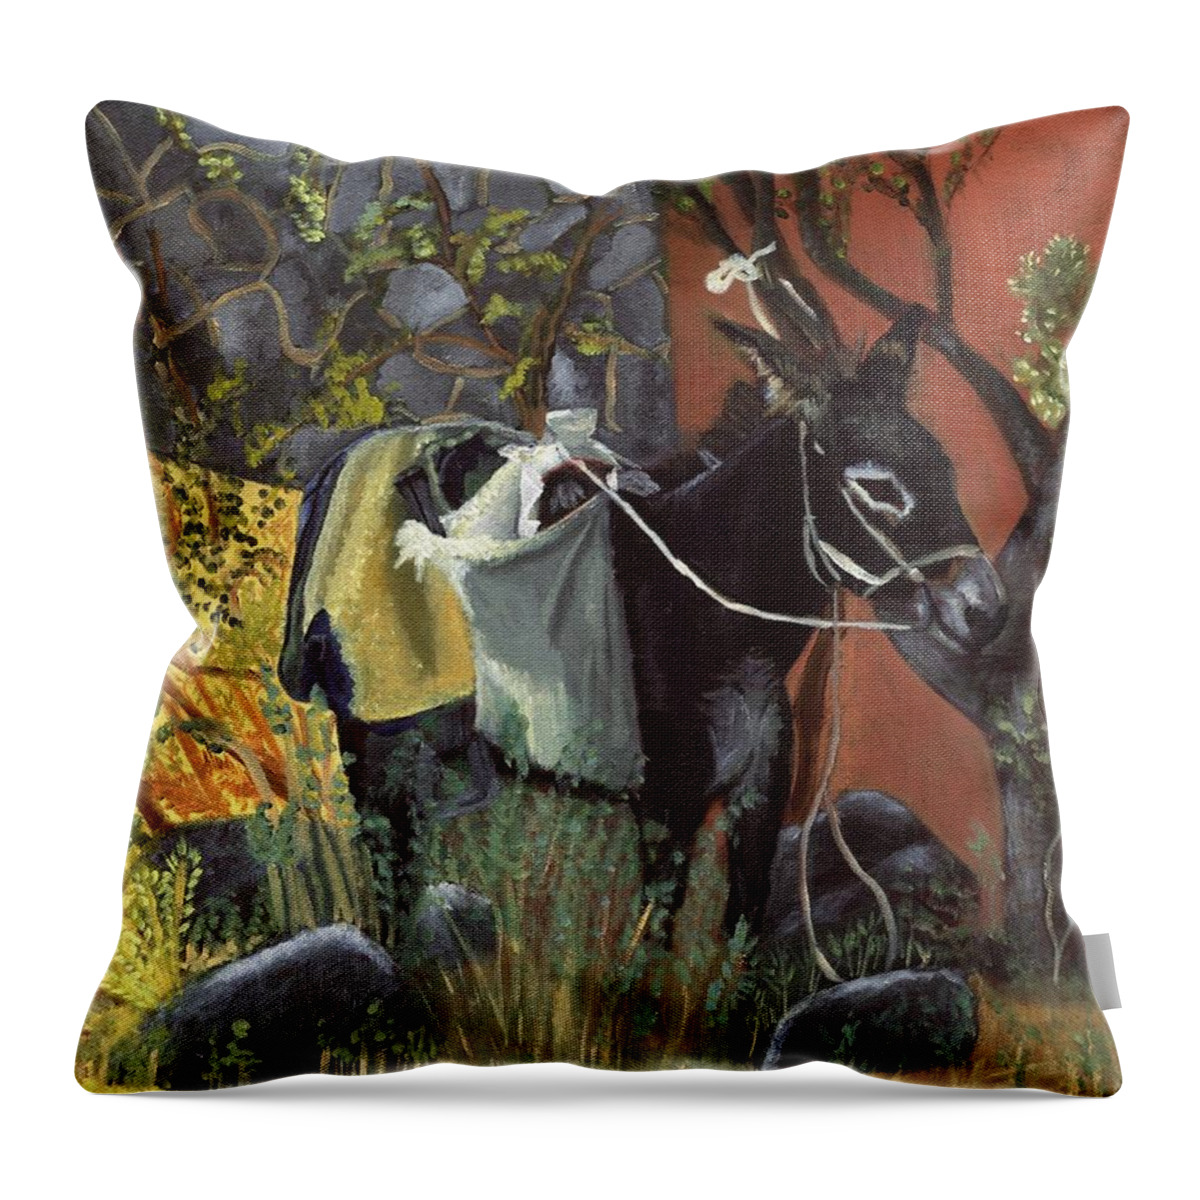 Donkey Throw Pillow featuring the painting Noontime Rest by Glenda Rogers